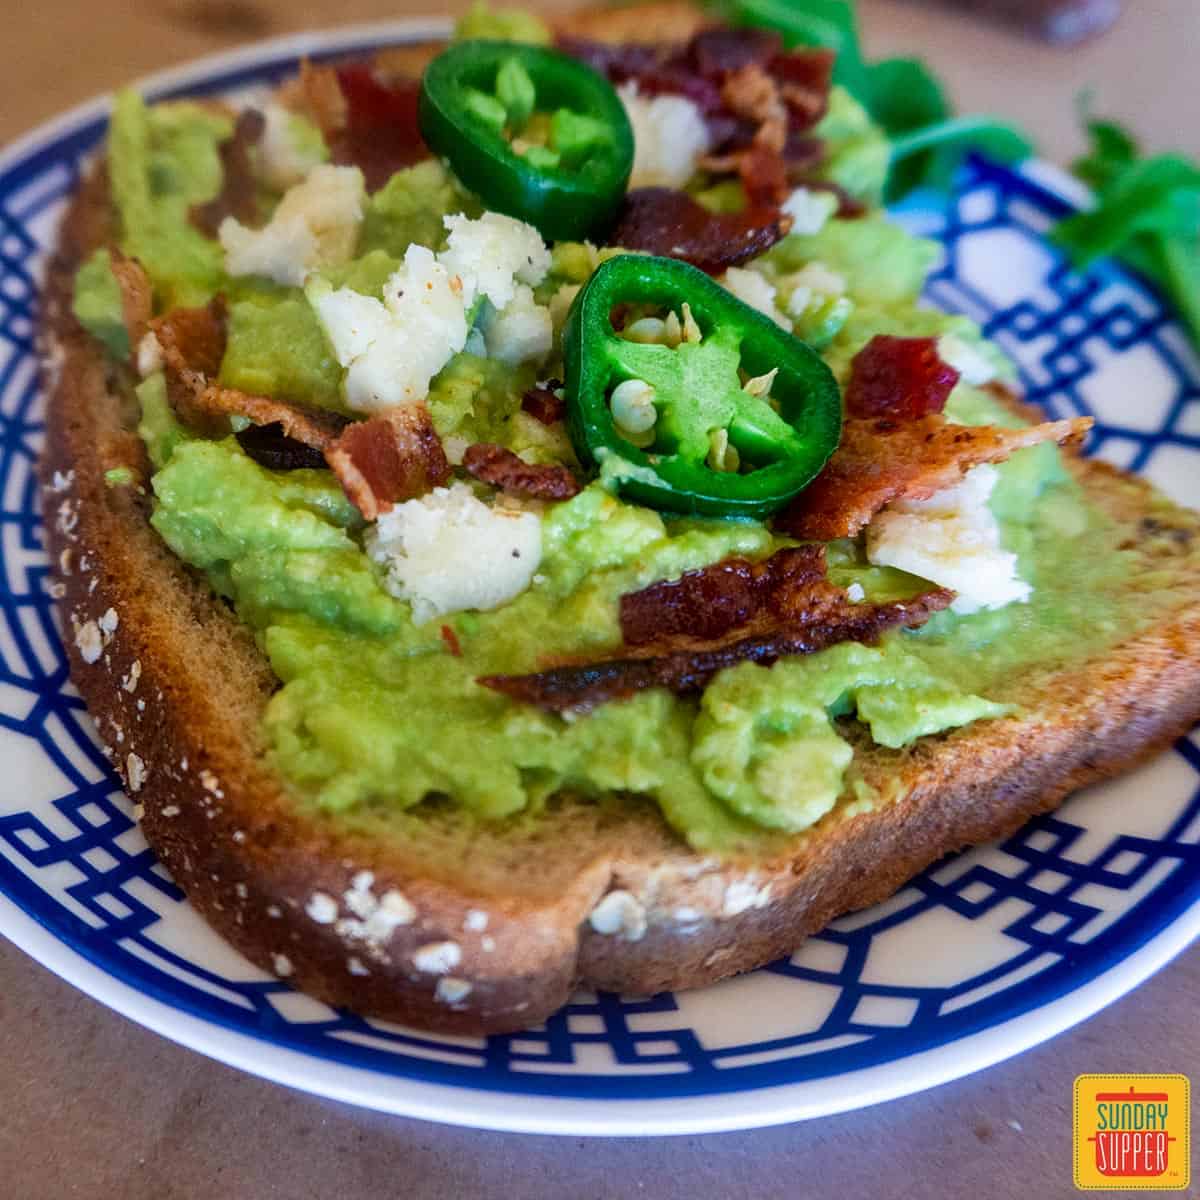 Two slices of avocado toast with bacon, goat cheese and jalapenos on a blue and white plate